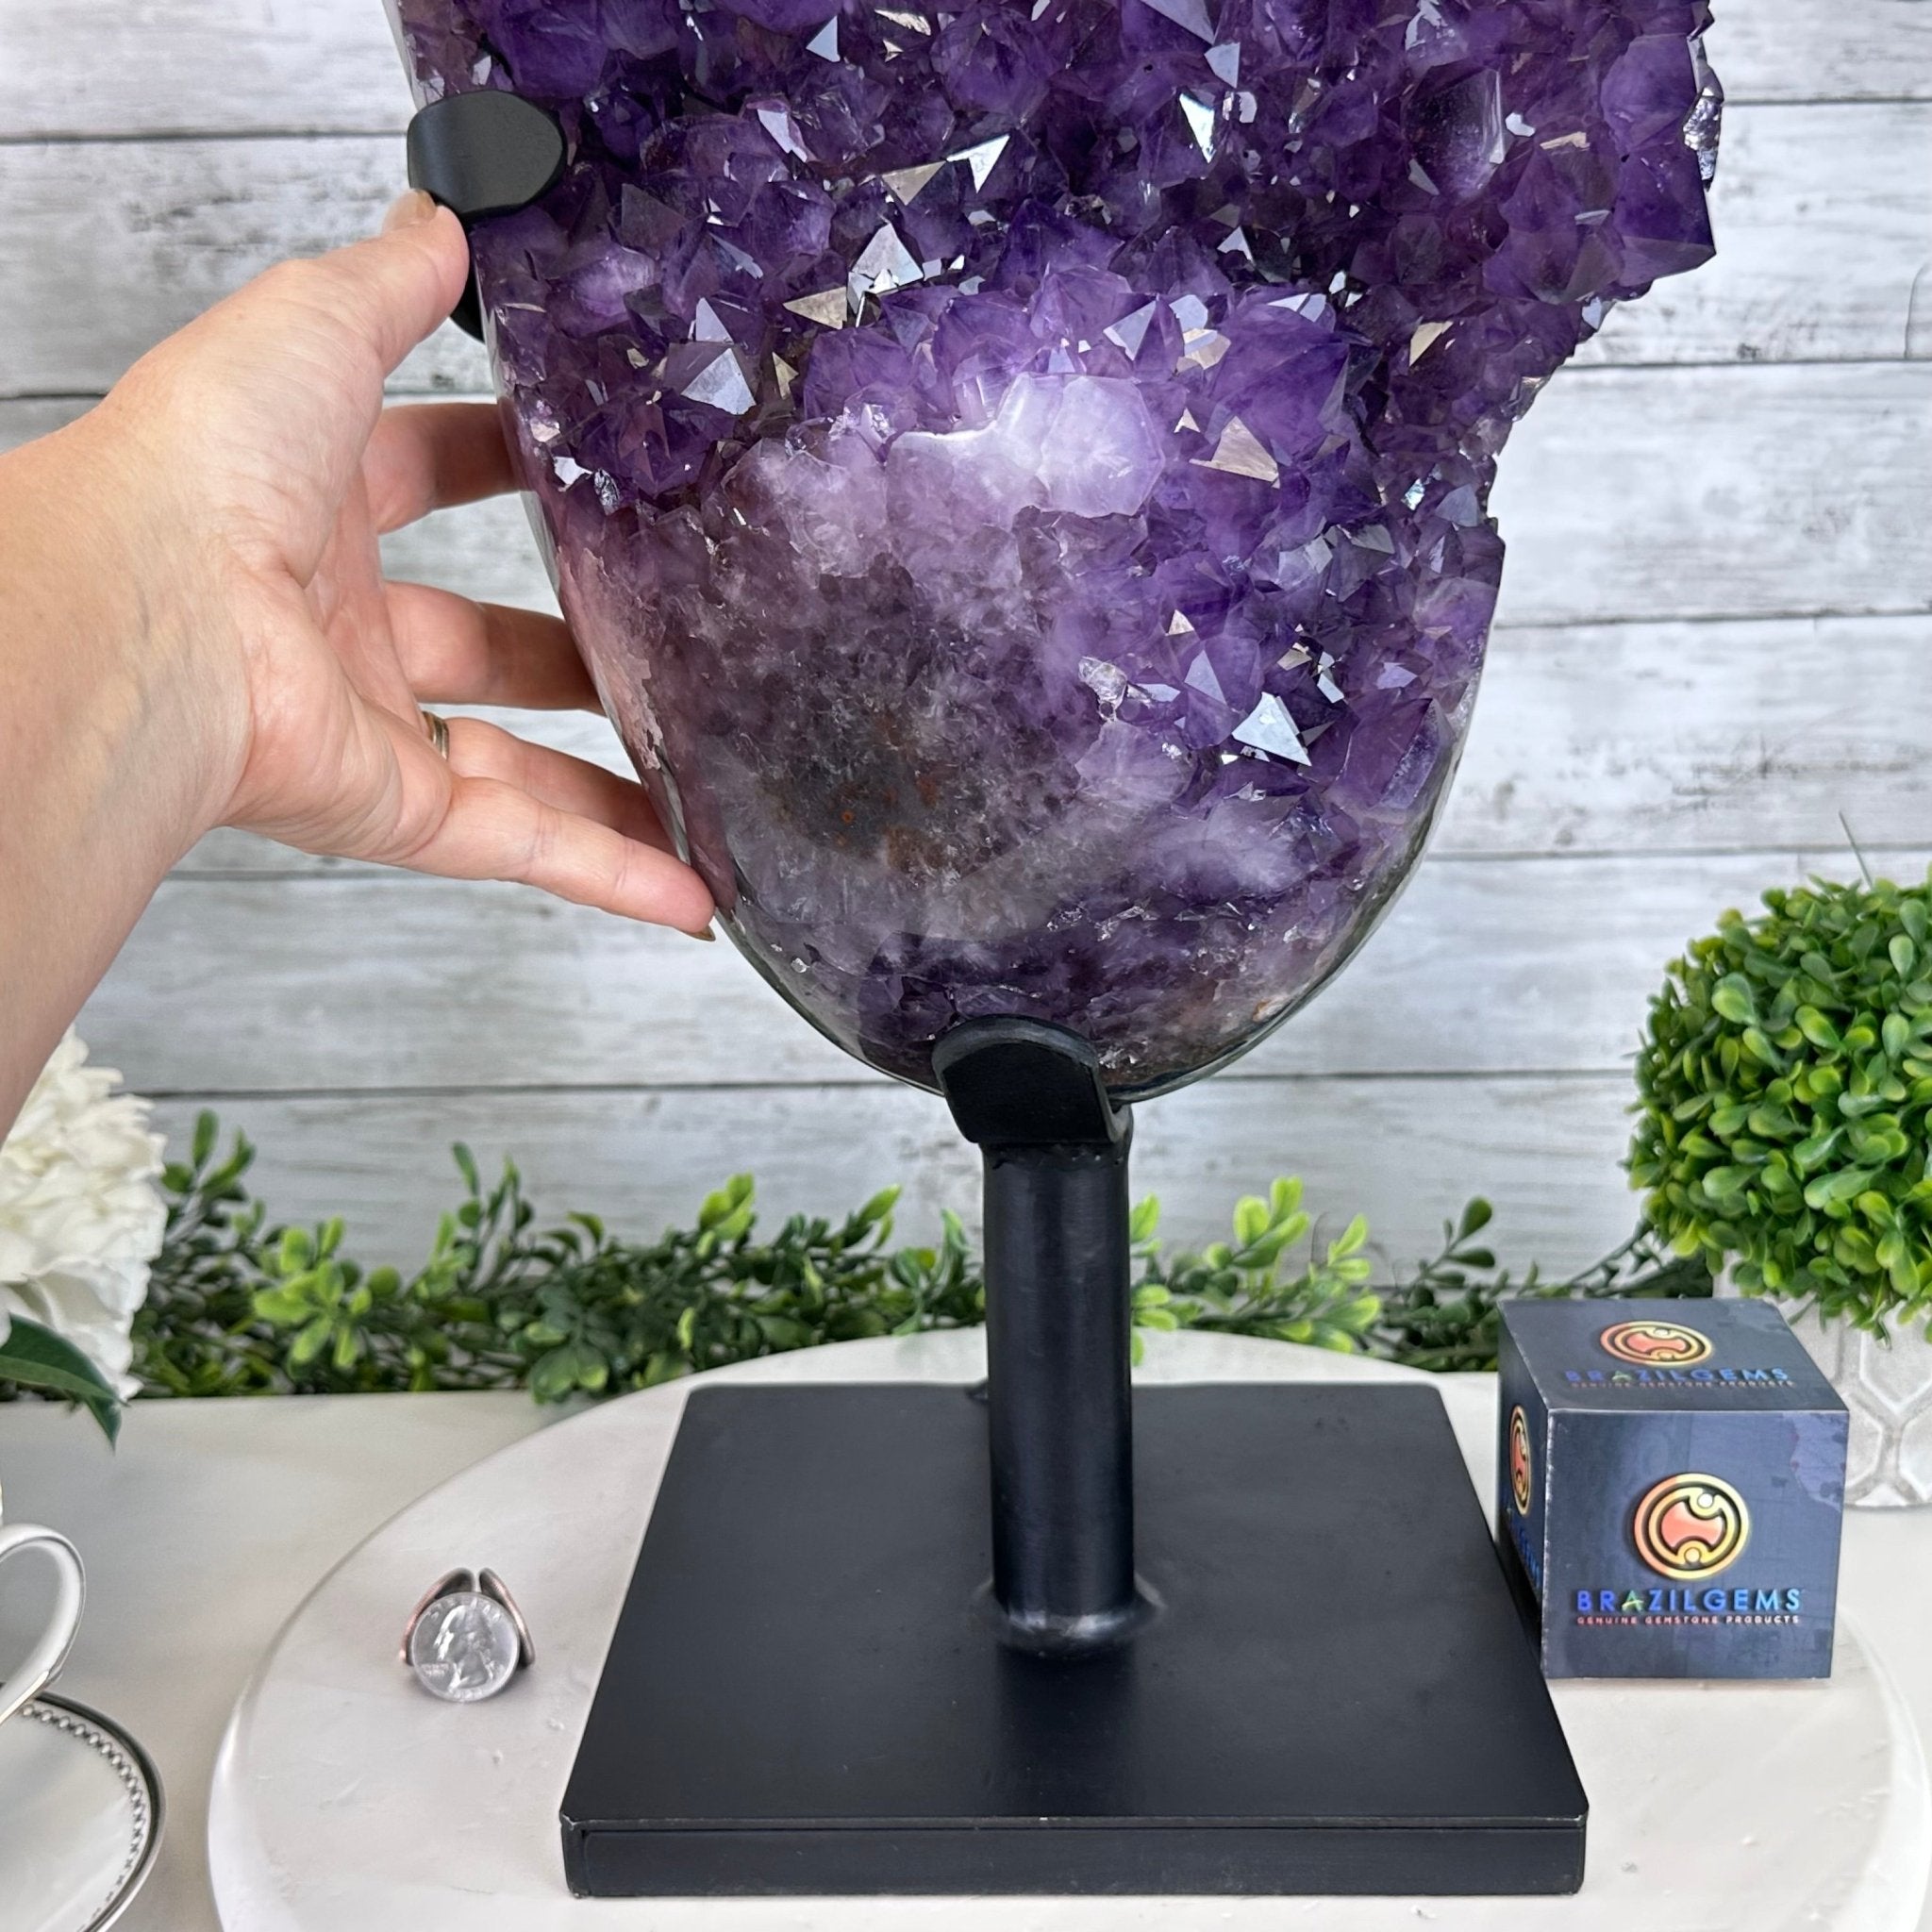 Amethyst Cluster on a Metal Base, 69.9 lbs & 23.1" Tall #5491 - 0146 - Brazil GemsBrazil GemsAmethyst Cluster on a Metal Base, 69.9 lbs & 23.1" Tall #5491 - 0146Clusters on Fixed Bases5491 - 0146